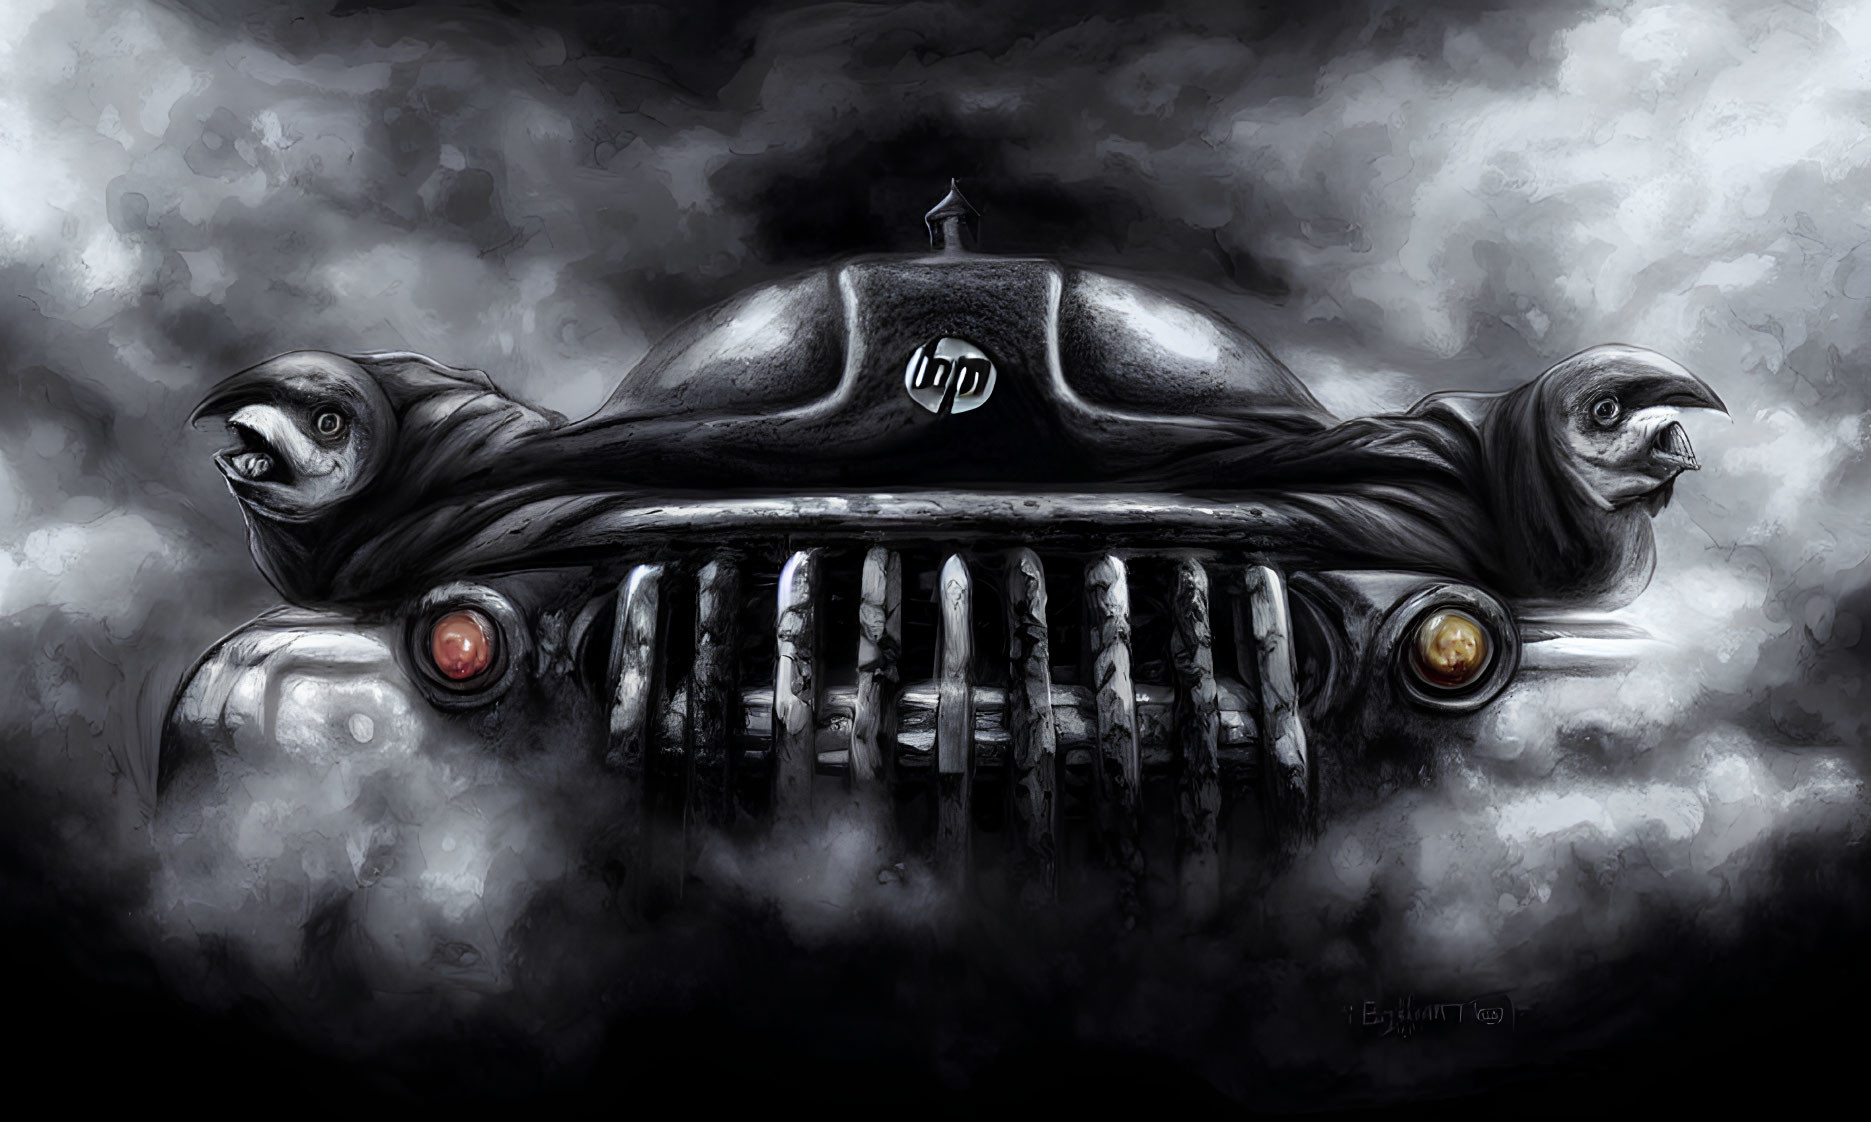 Digital image of car with menacing face front grill and eagle heads on stormy backdrop